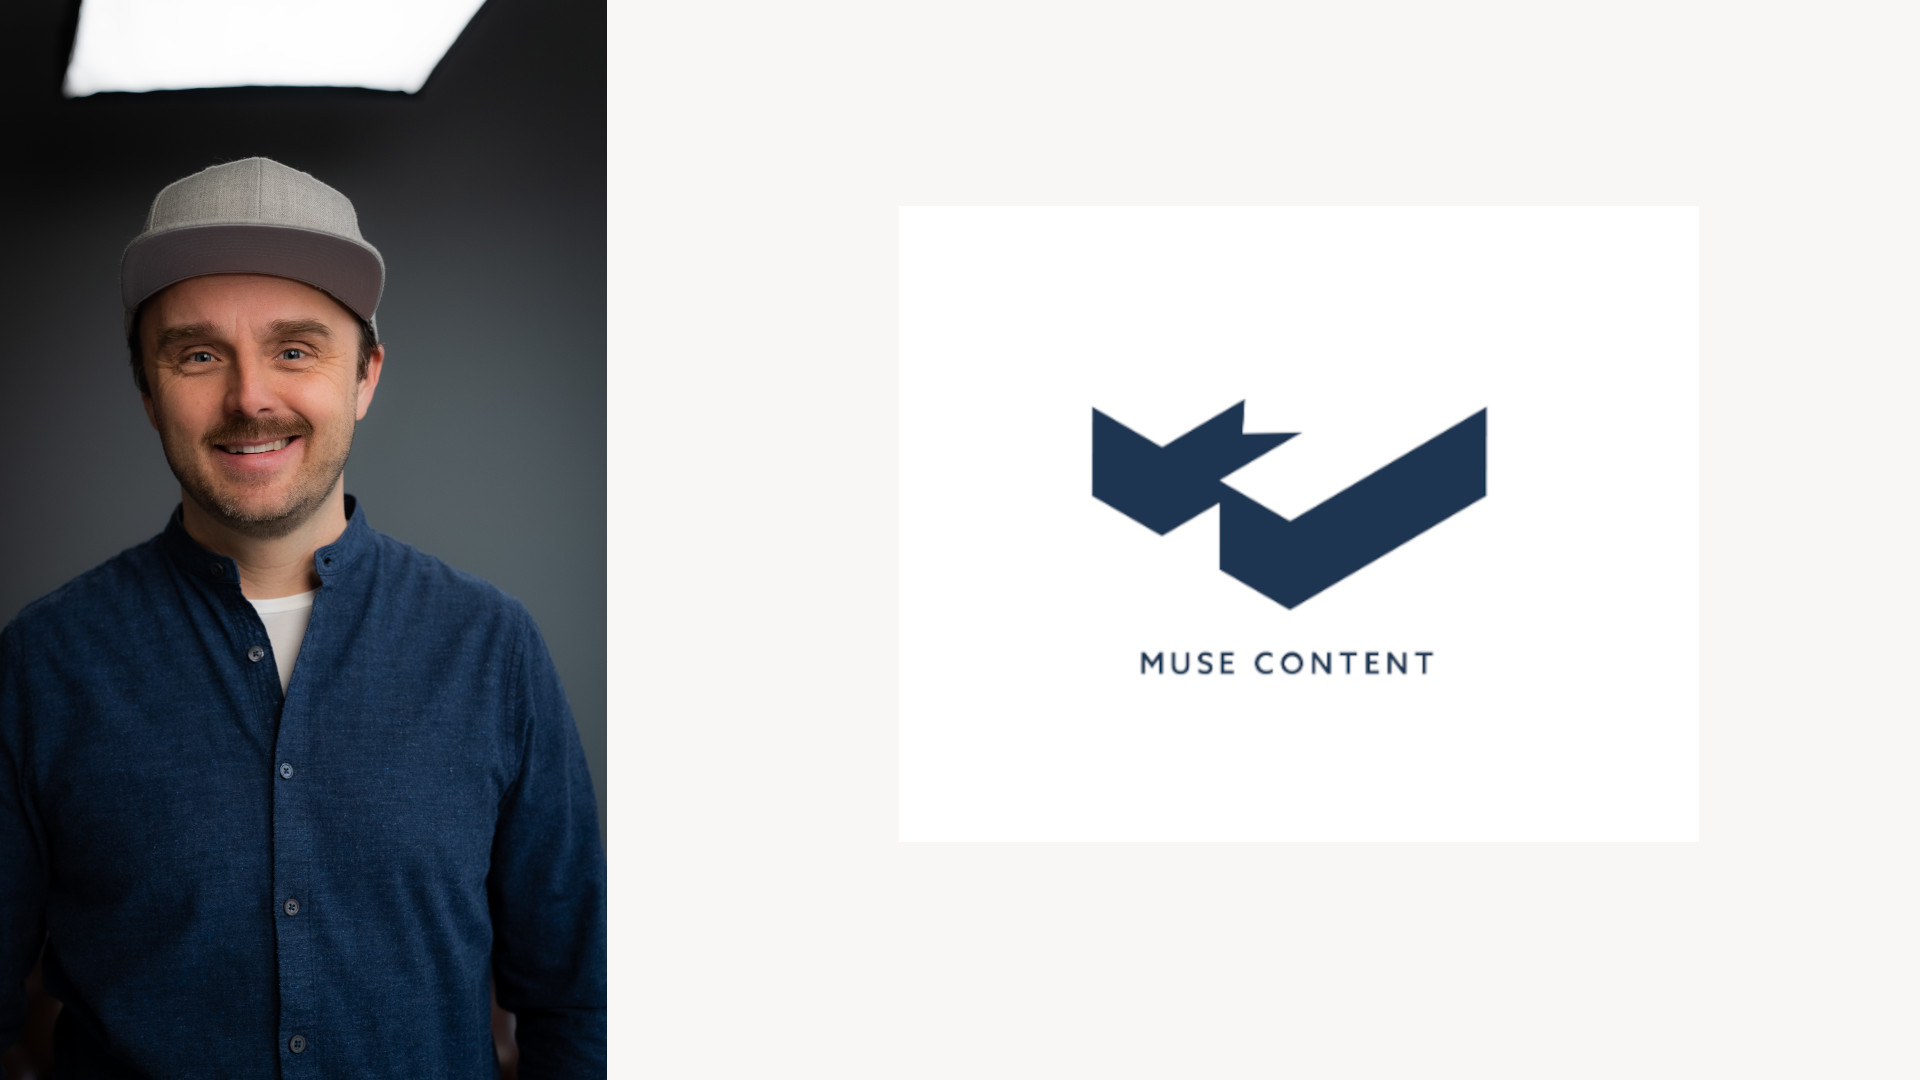 Marco Burkhardtsmayer, CEO and Founder of Muse Content (Photo: MuSe Content)